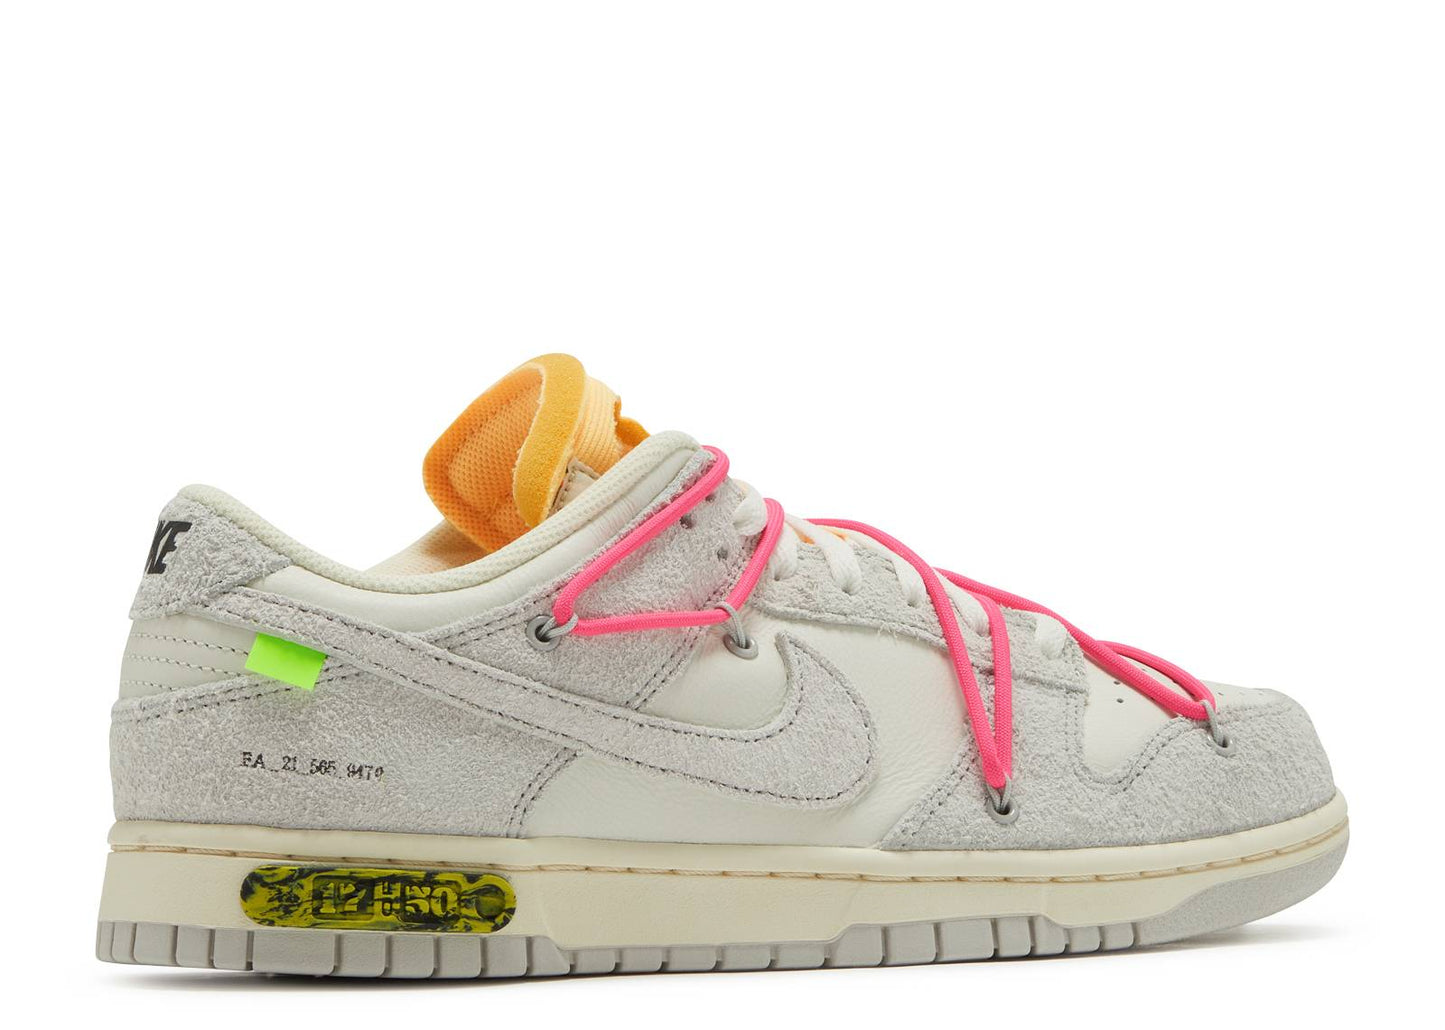 Off-White x Nike Dunk Low "Dear Summer - Lot 17 of 50"